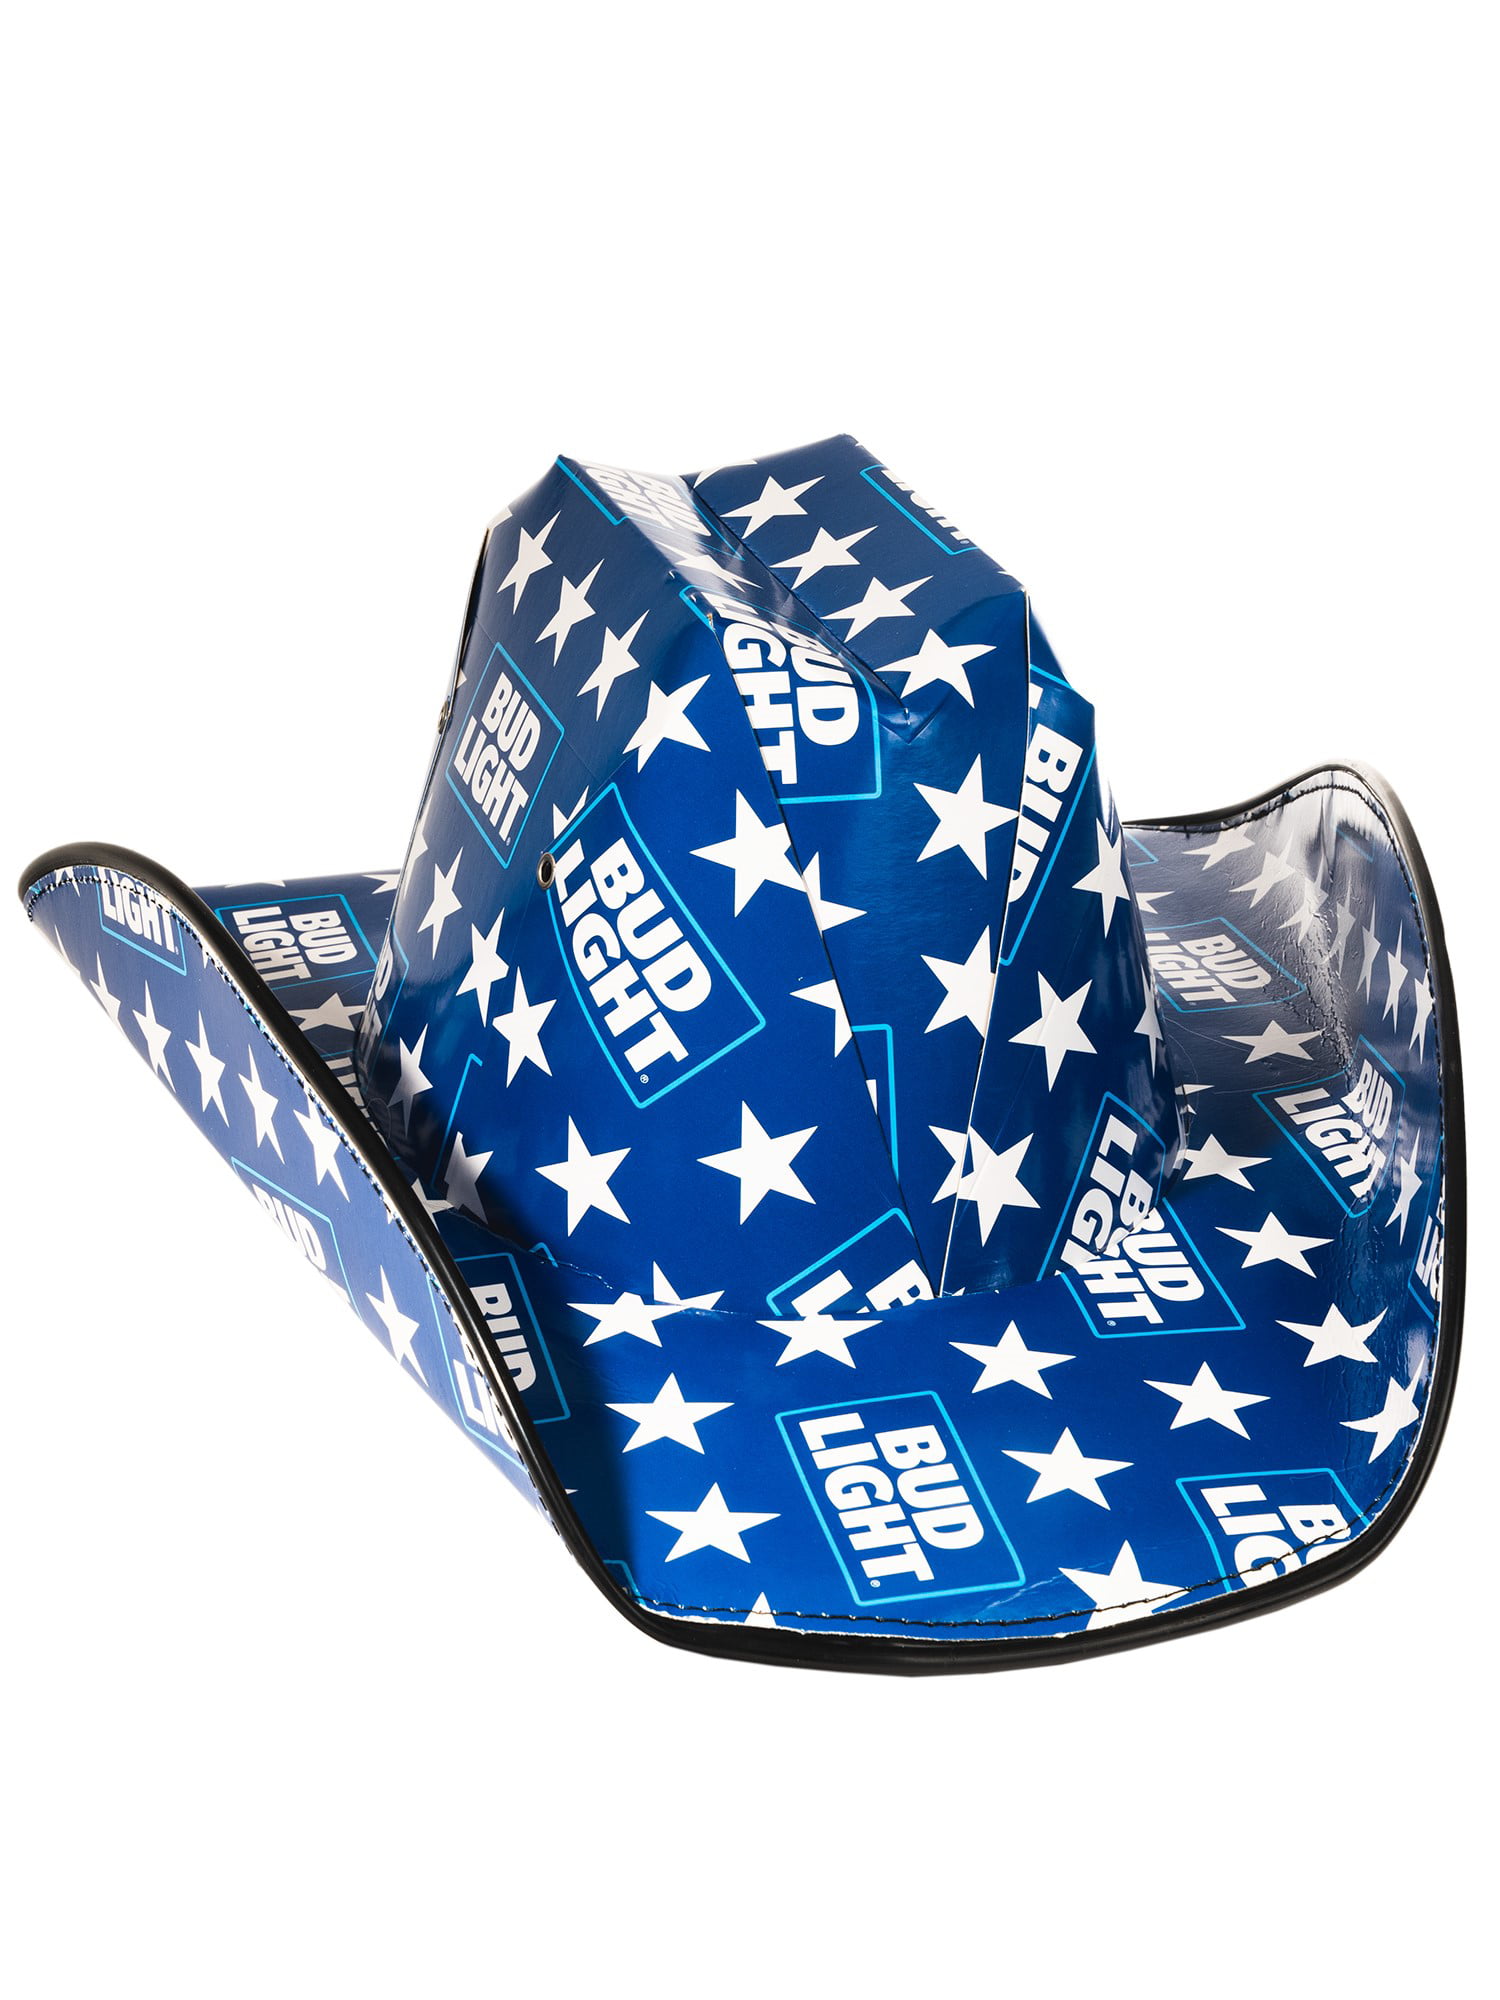 2021 Patriotic BUDWEISER & BUD LIGHT COWBOY Cowgirl Beer Case Box HATS NWT LOT